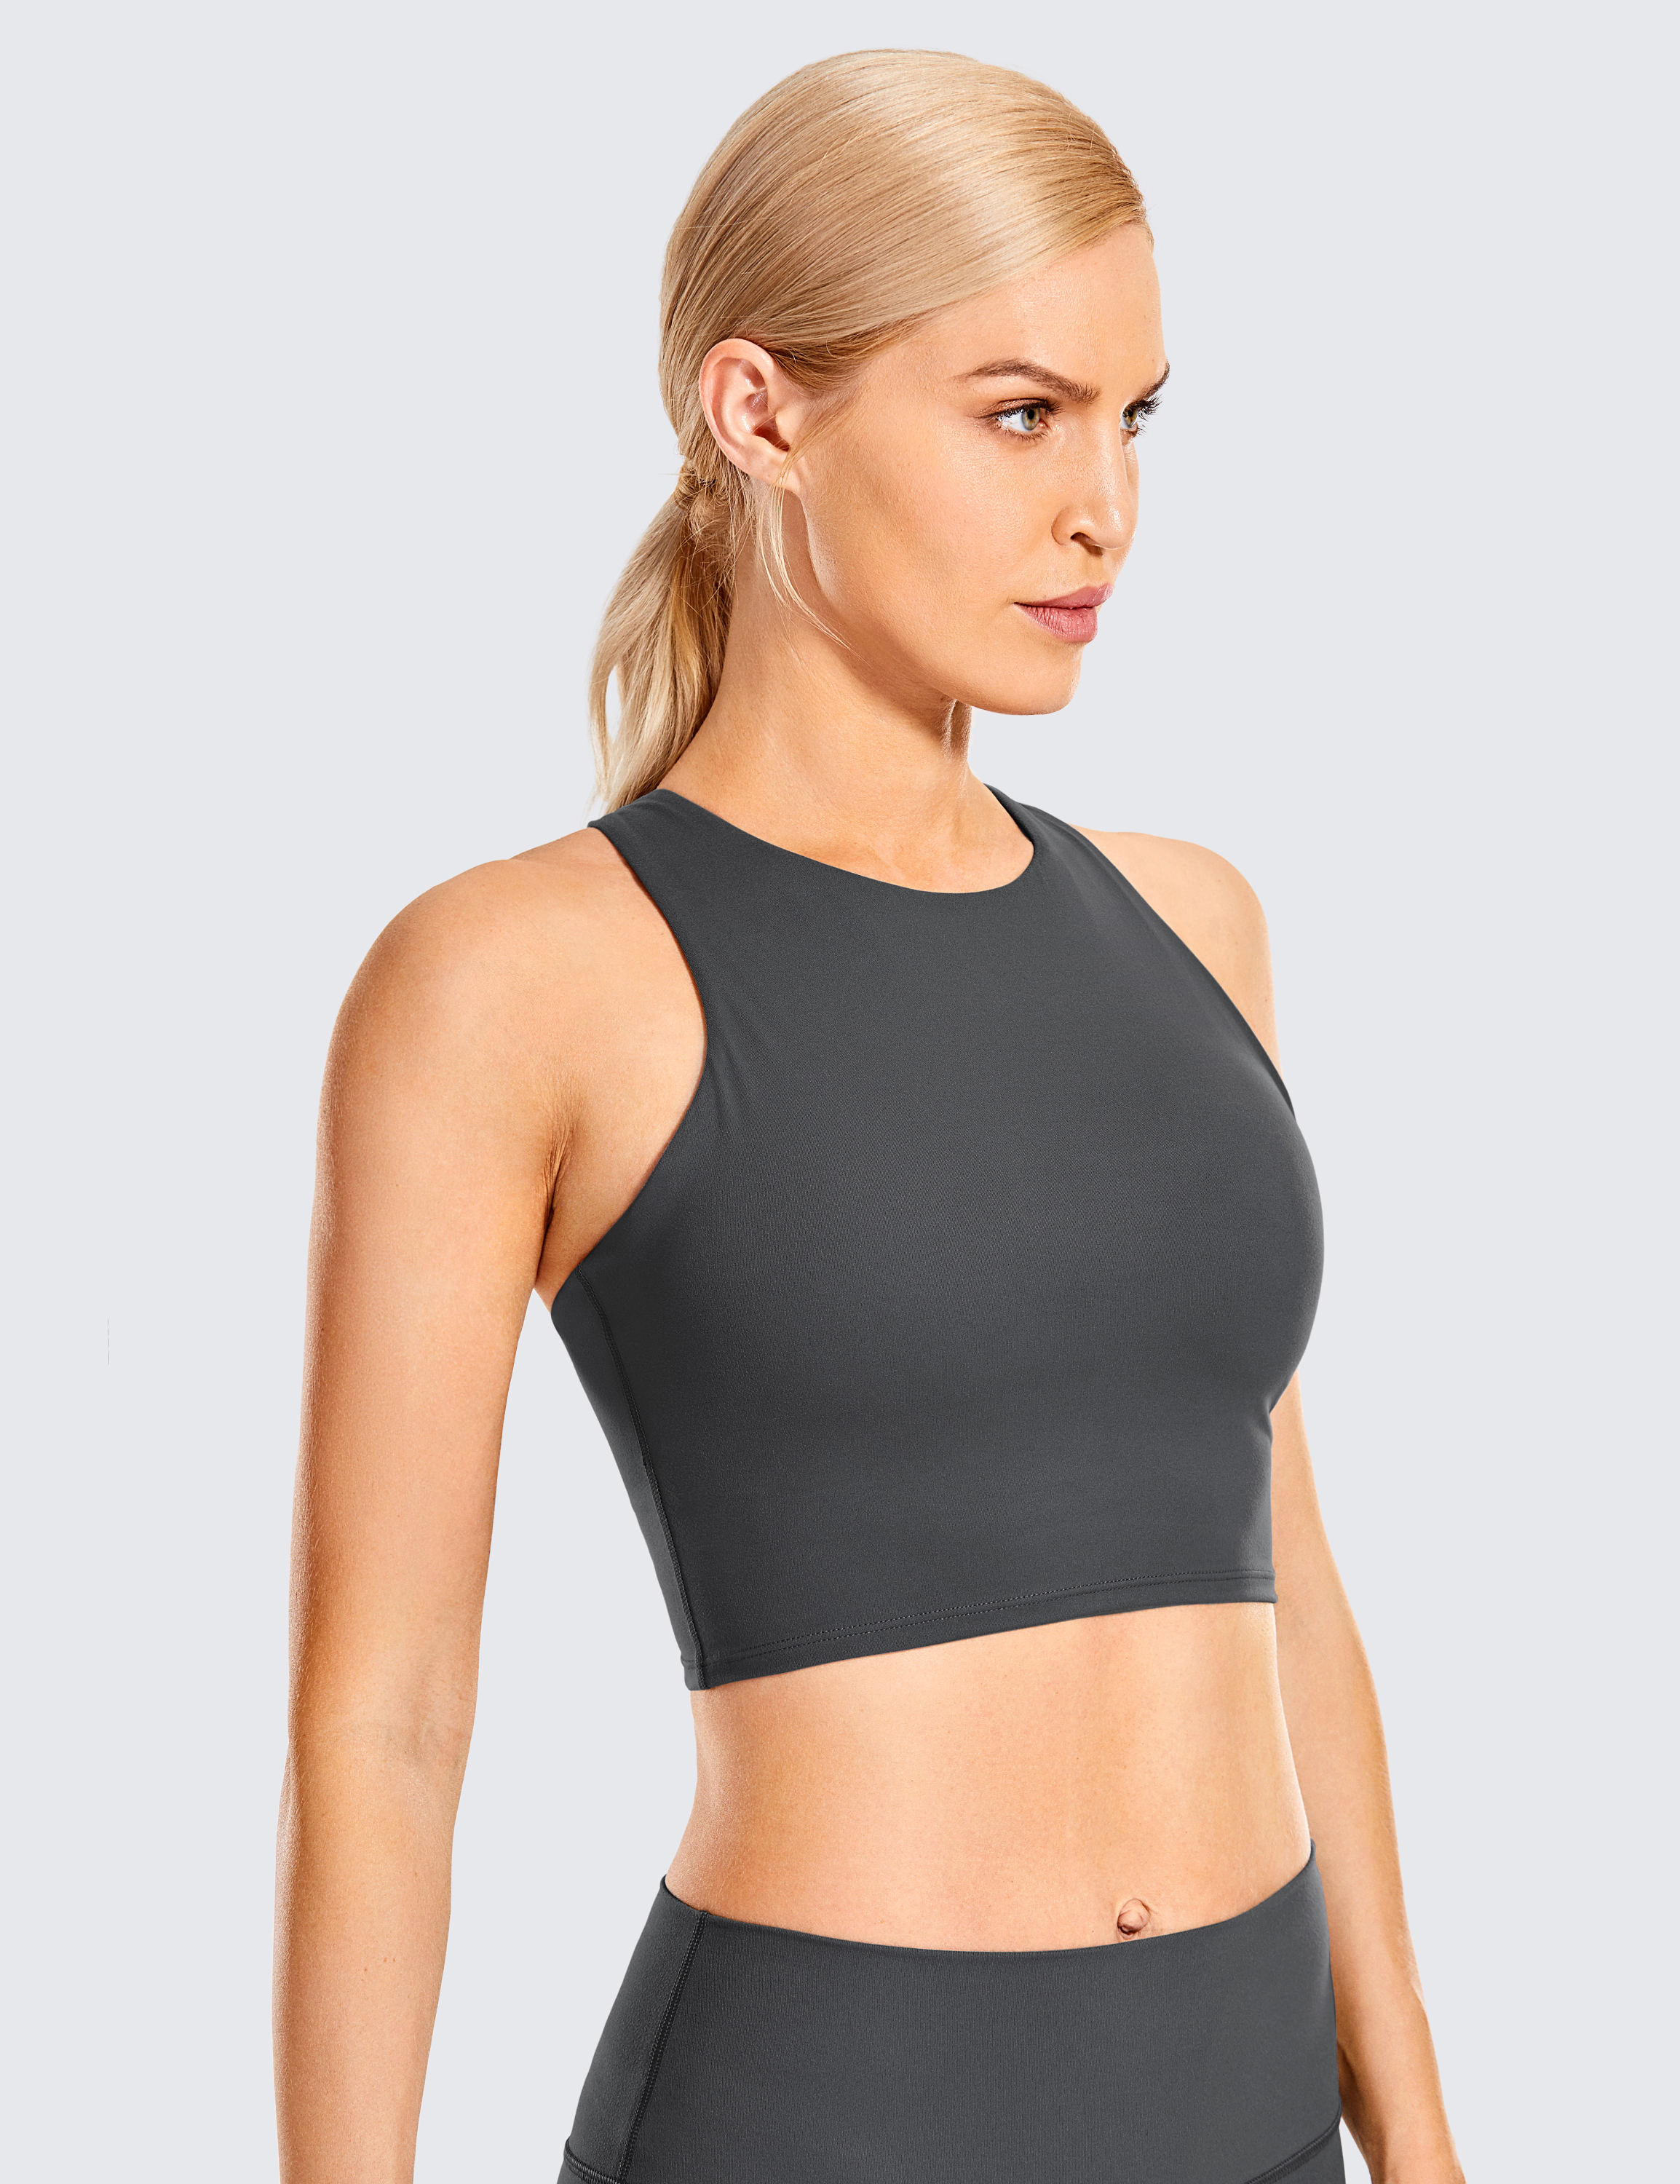 Set SHINBENE Seamless Naked Feel Antisweat Sports Running Yoga Athletic  Bras Women Workout Fitness Crop Tank Tops With Built In Bra From Zcdsk,  $20.46